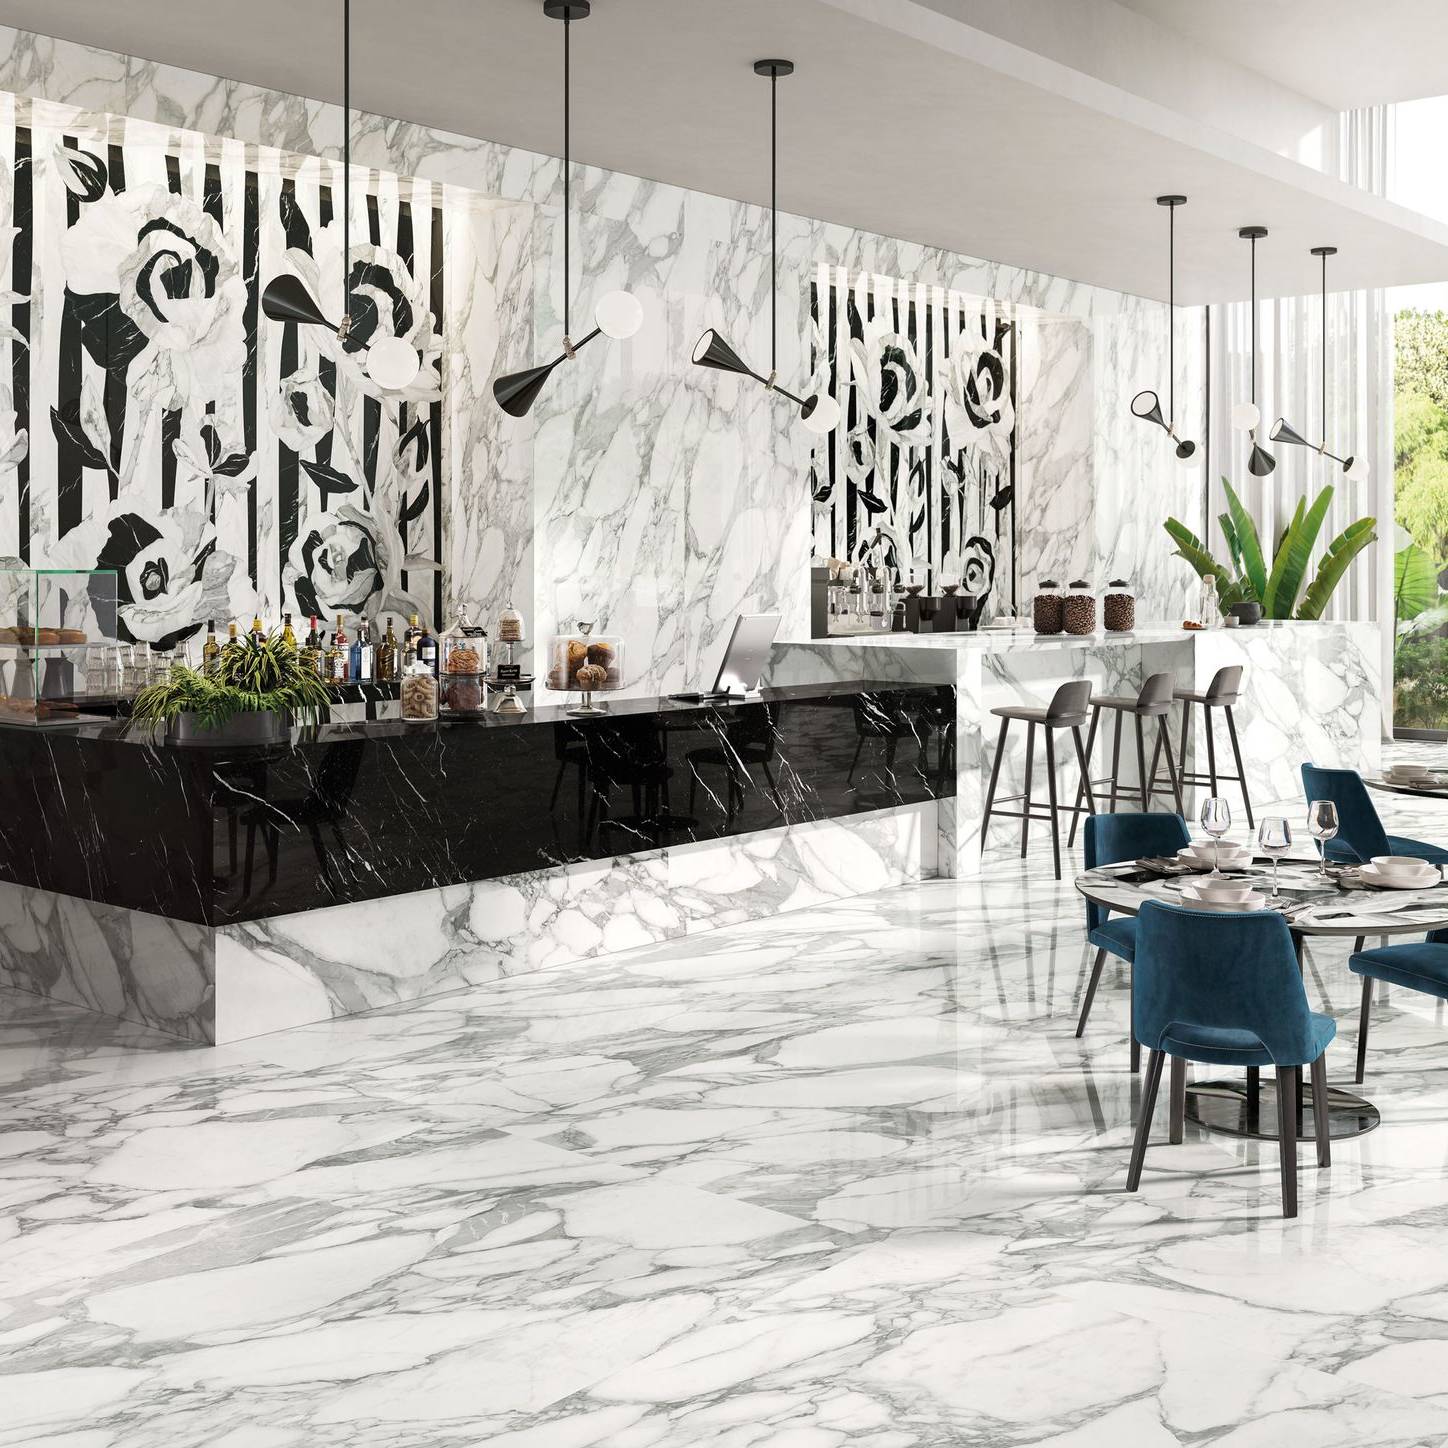 Selection 3 | Stones And More | Finest selection of Mosaics, Glass, Tile and Stone